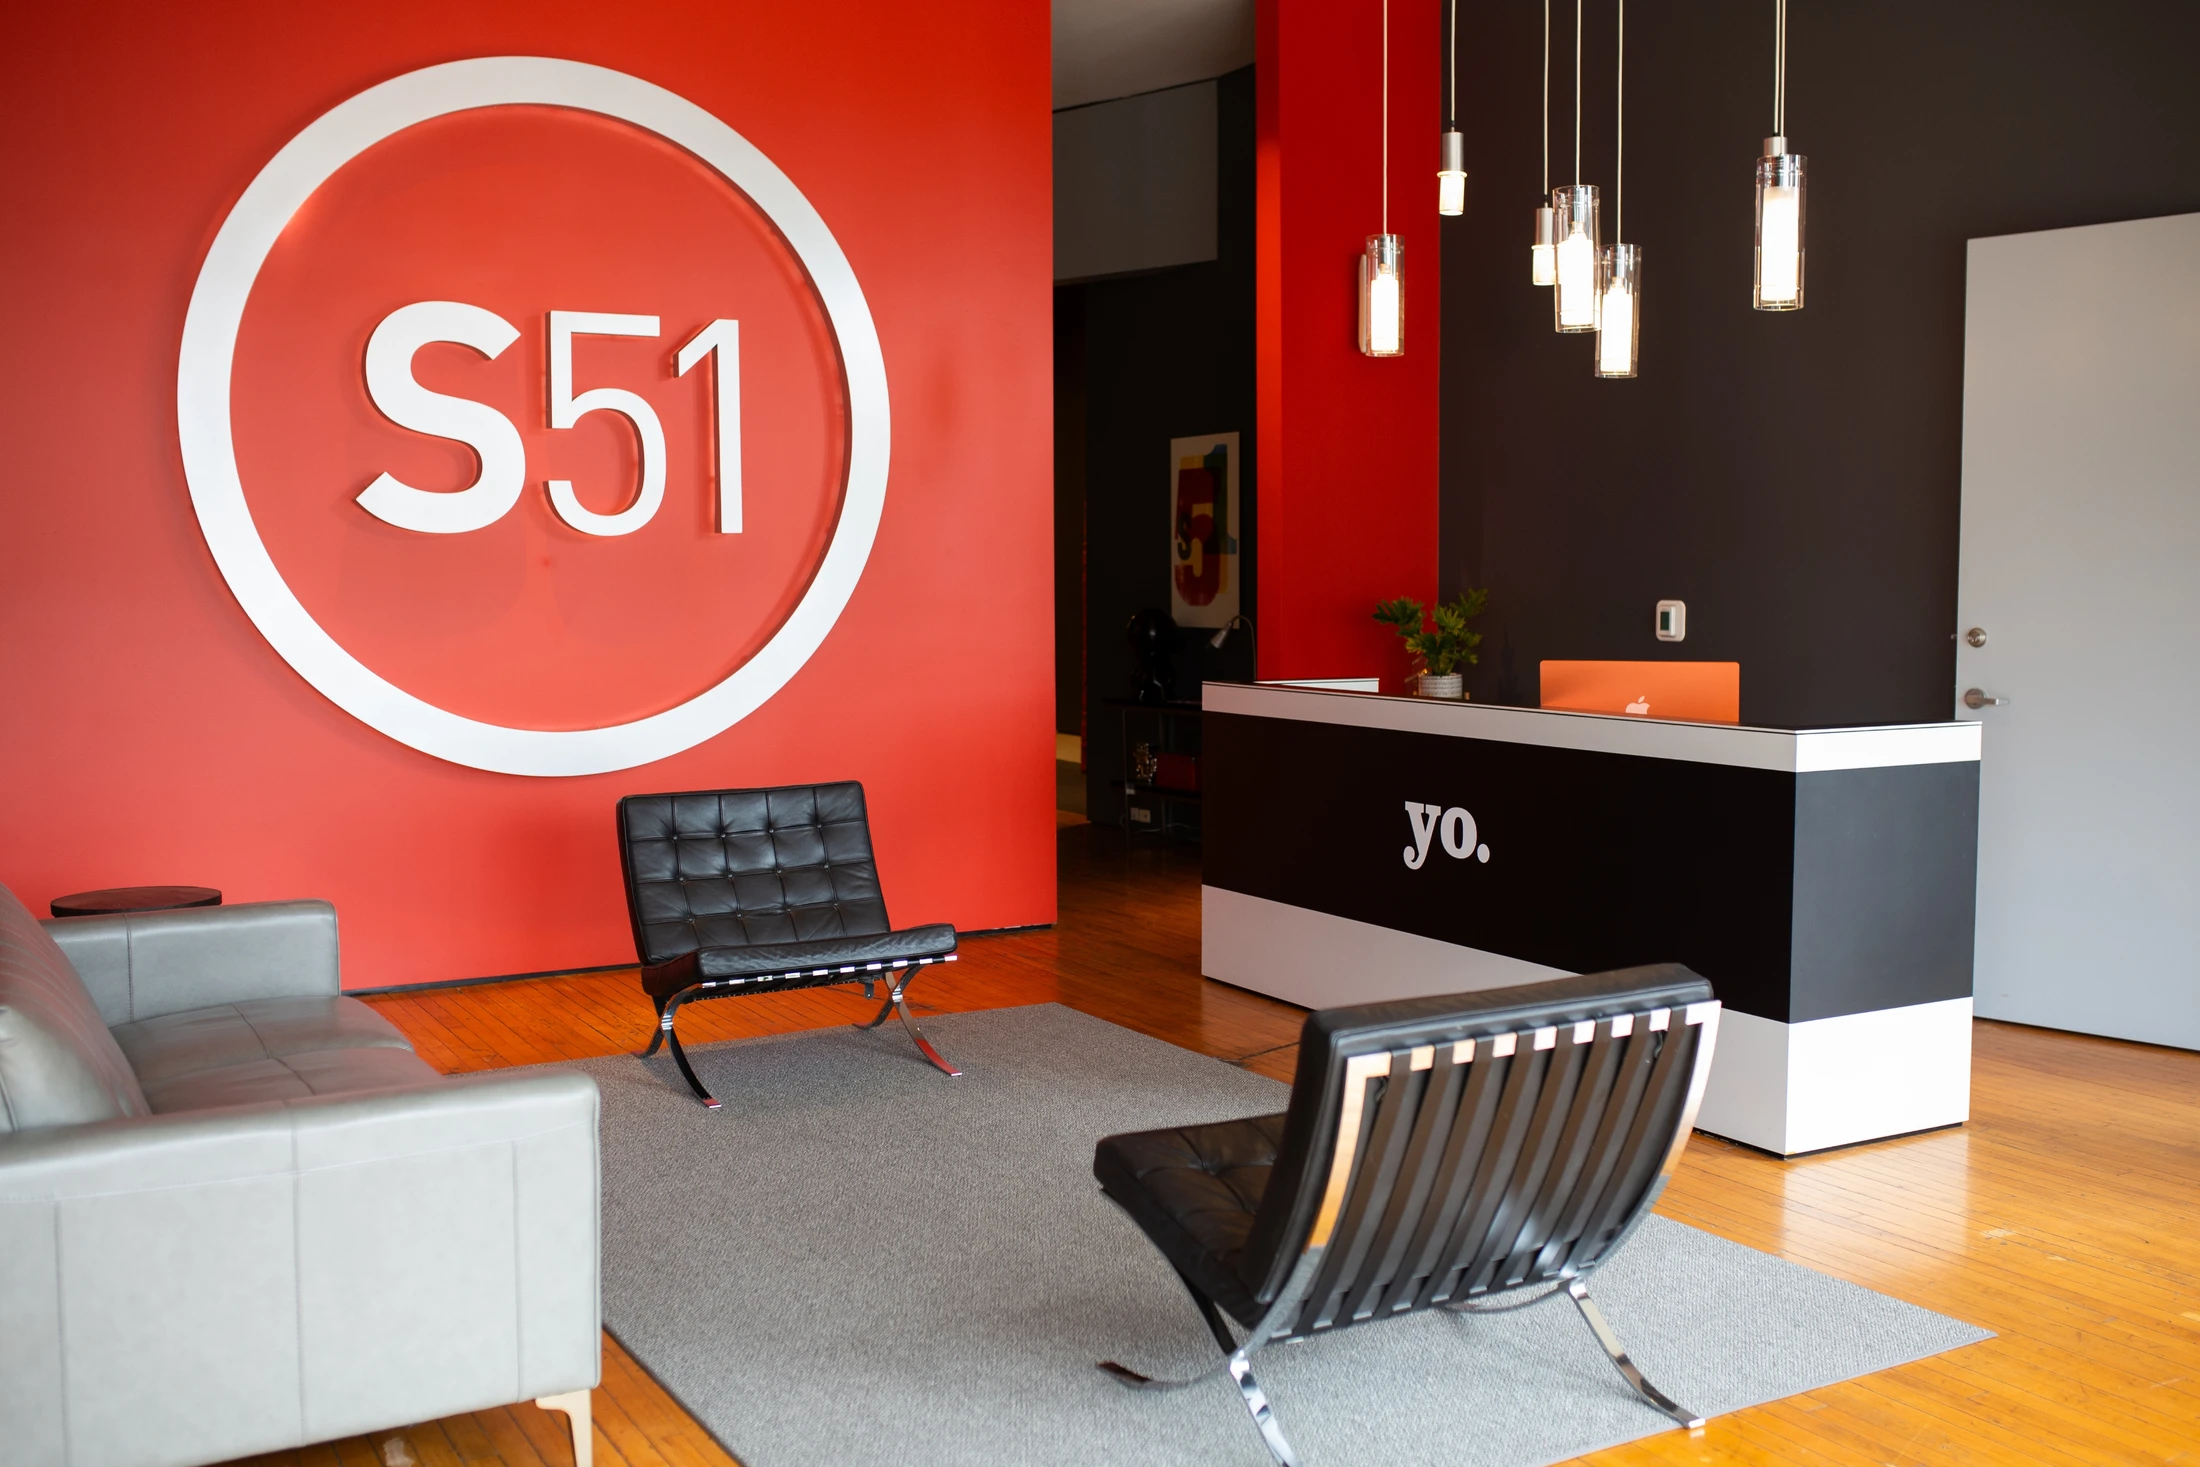 A reception area with a red and black wall.